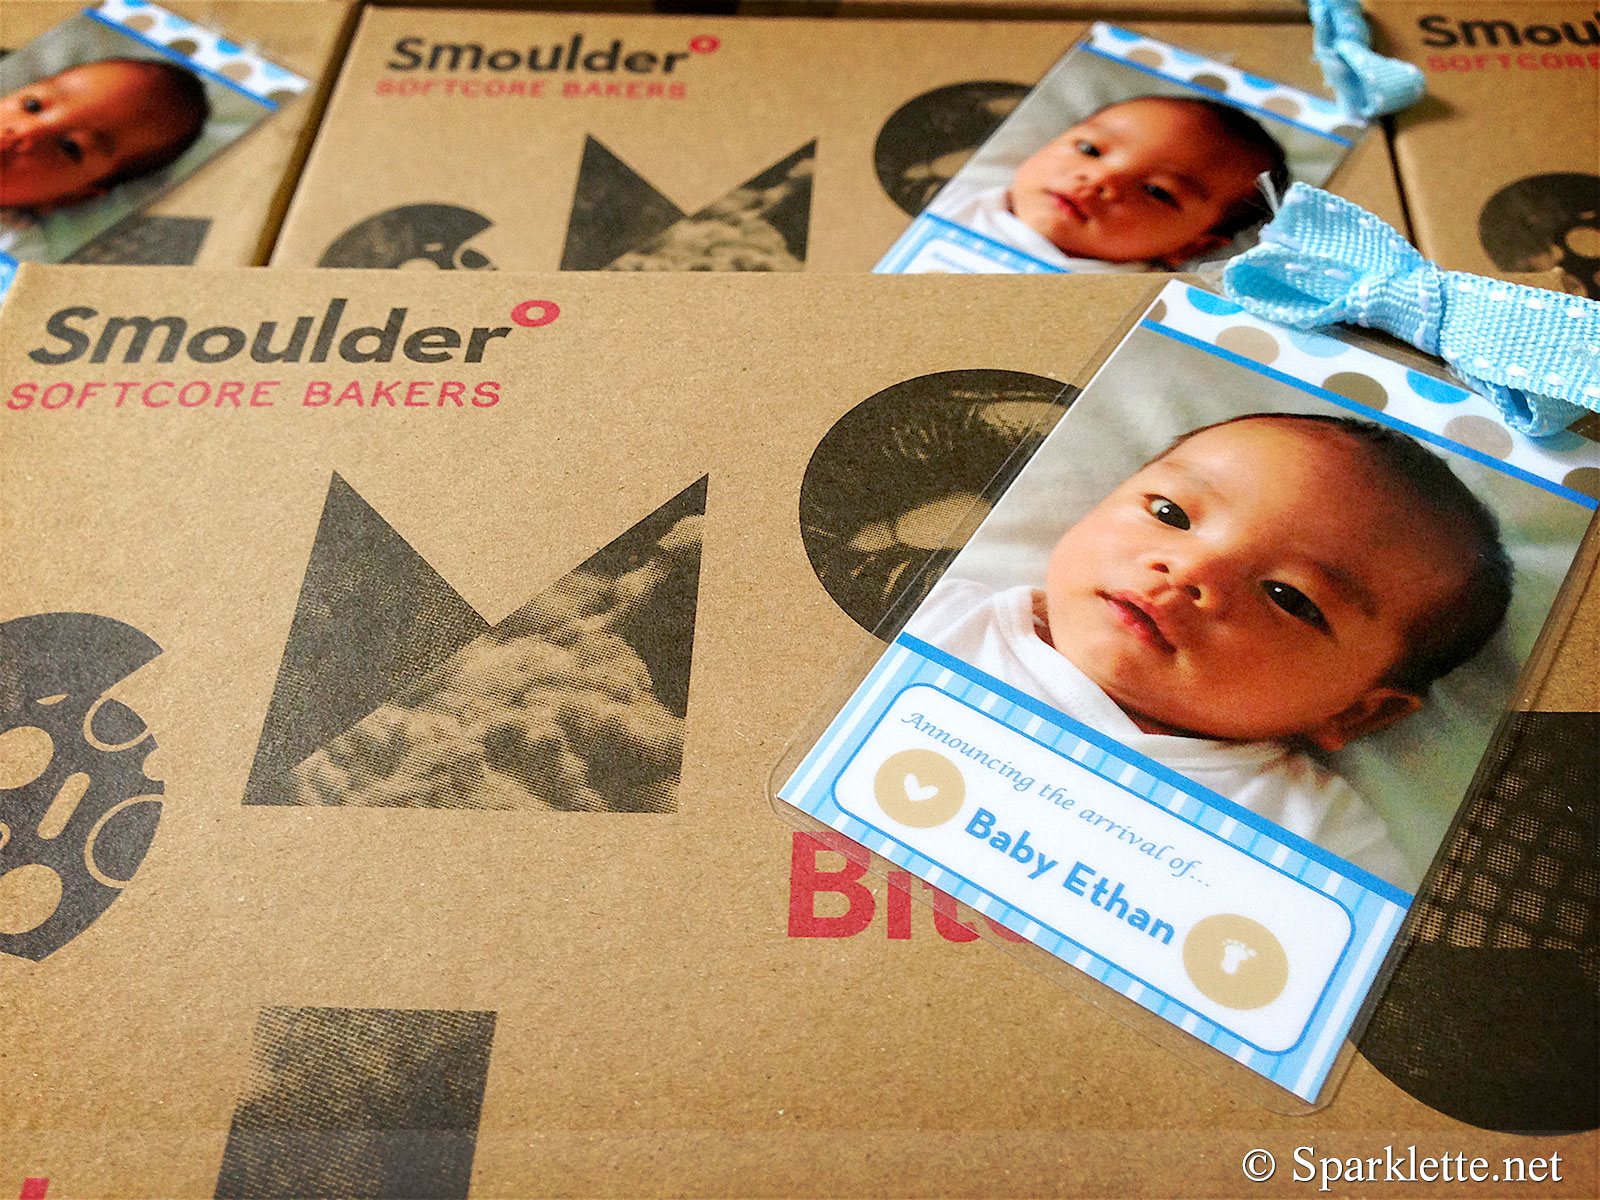 Smoulder's Baby Beginnings packages